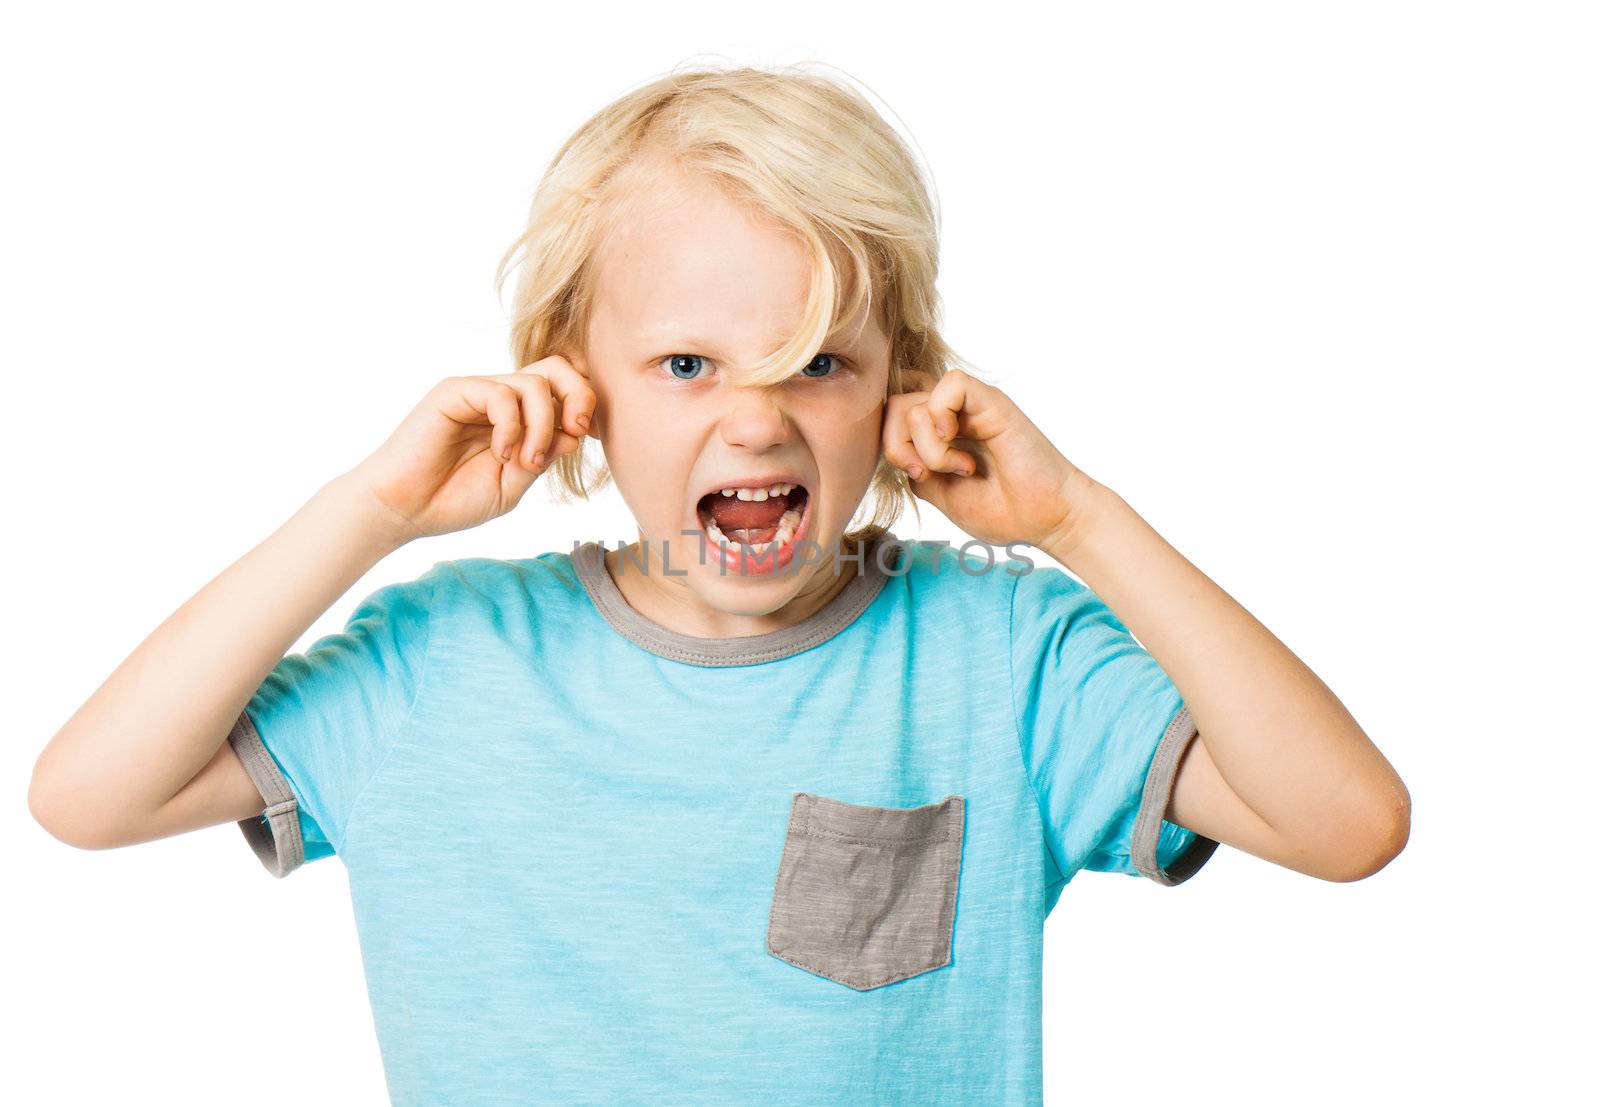 A young angry boy screaming and blocking his ears. Isolated on white.